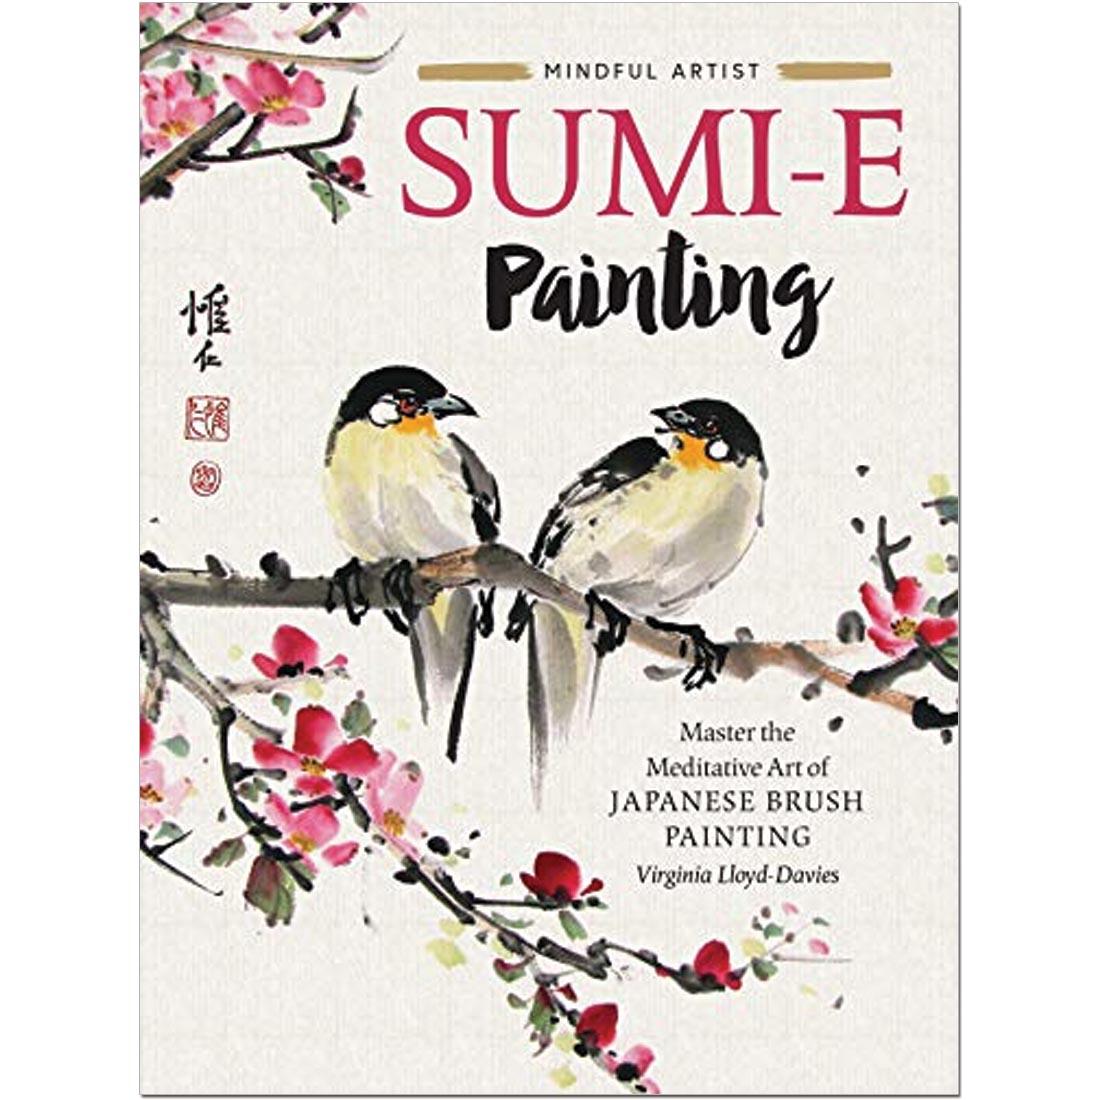 cover of book - Mindful Artist: Sumi-E Painting